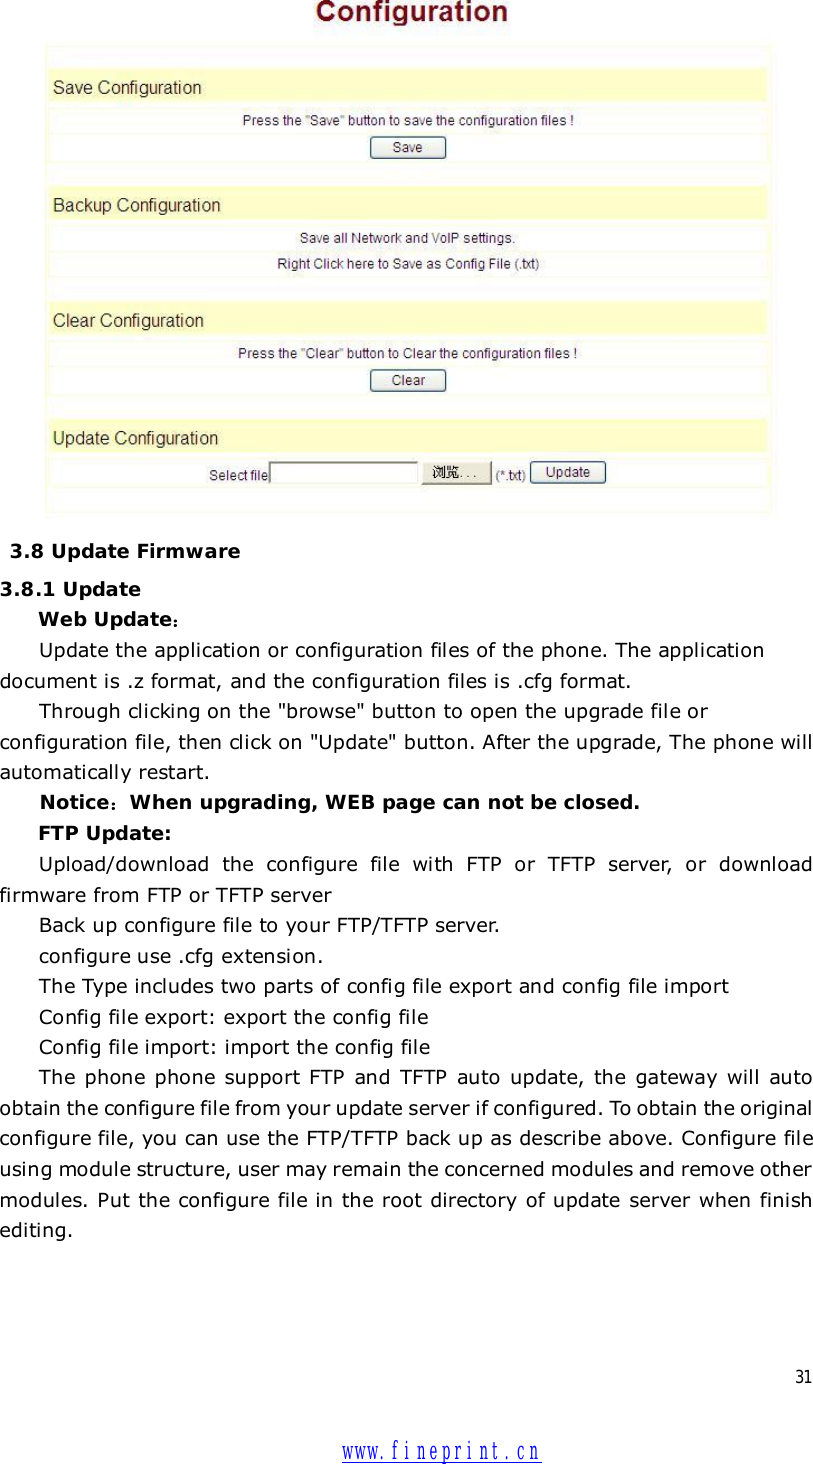  31   3.8 Update Firmware 3.8.1 Update  Web Update： Update the application or configuration files of the phone. The application document is .z format, and the configuration files is .cfg format. Through clicking on the &quot;browse&quot; button to open the upgrade file or configuration file, then click on &quot;Update&quot; button. After the upgrade, The phone will automatically restart. Notice：When upgrading, WEB page can not be closed. FTP Update:  Upload/download the configure file with FTP or TFTP server, or download firmware from FTP or TFTP server Back up configure file to your FTP/TFTP server.  configure use .cfg extension. The Type includes two parts of config file export and config file import Config file export: export the config file  Config file import: import the config file The phone phone support FTP and TFTP auto update, the gateway will auto obtain the configure file from your update server if configured. To obtain the original configure file, you can use the FTP/TFTP back up as describe above. Configure file using module structure, user may remain the concerned modules and remove other modules. Put the configure file in the root directory of update server when finish editing.  www.fineprint.cn